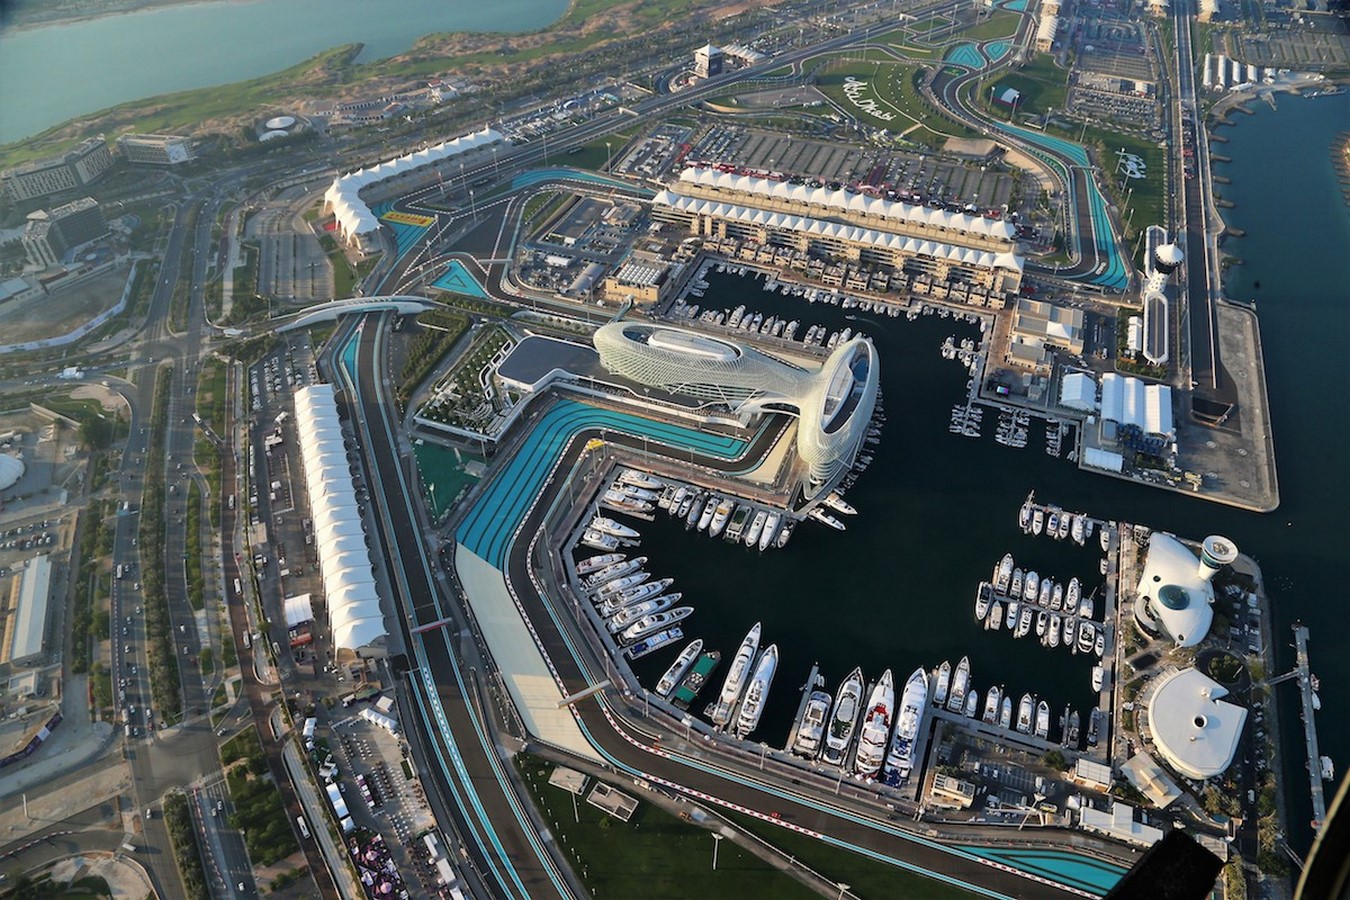 An overview of Formula One and Architecture - Sheet6